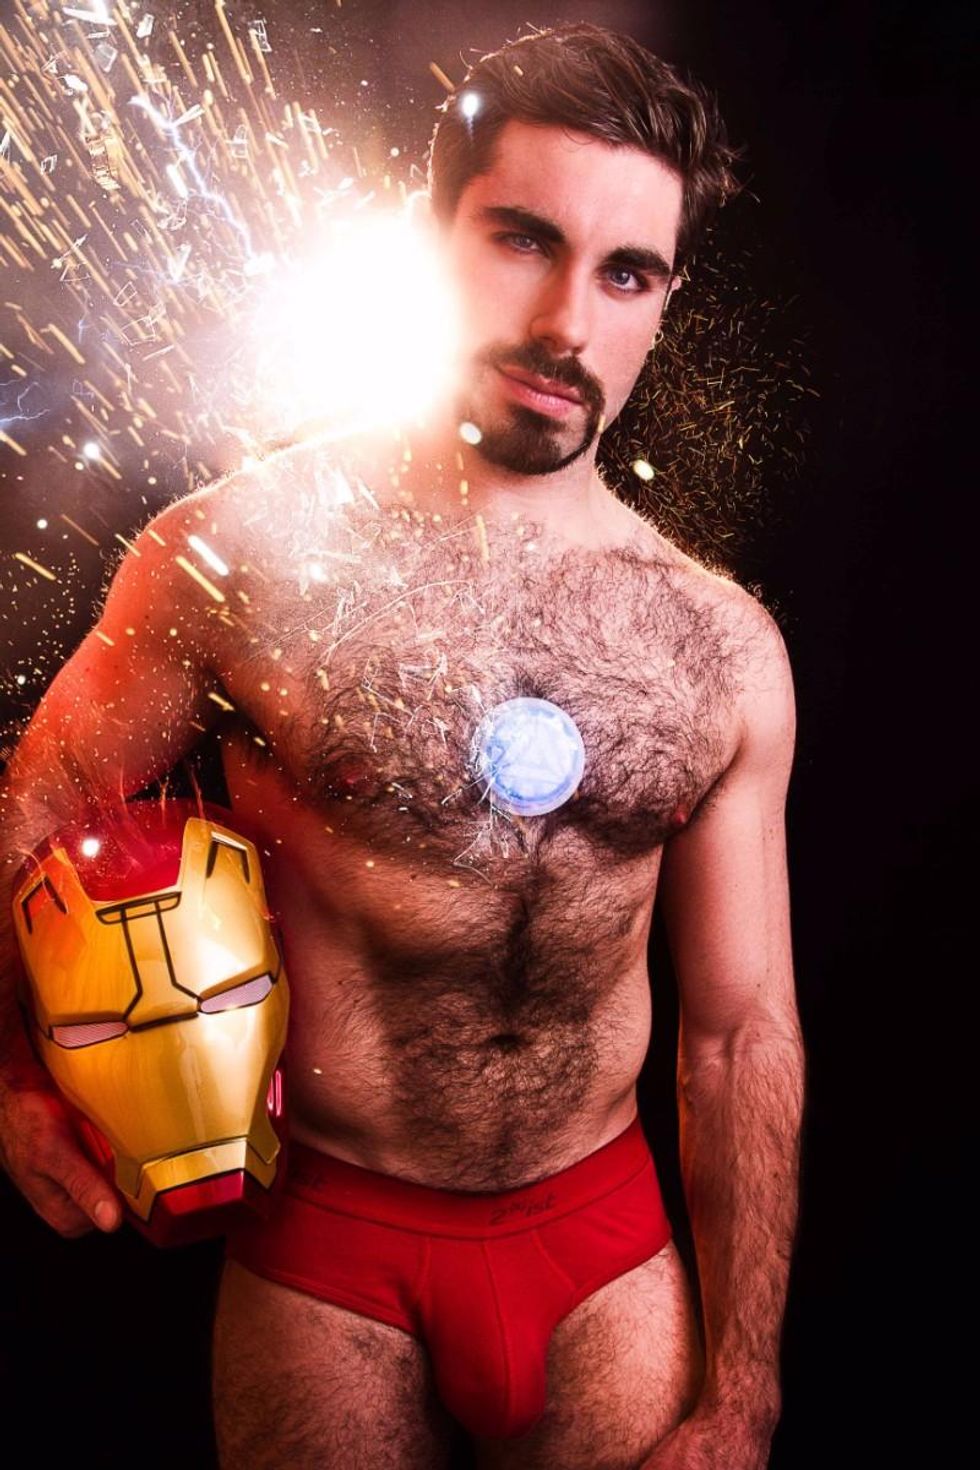 Can Nerds Be Sexy? This Artist's Photos Prove They Are